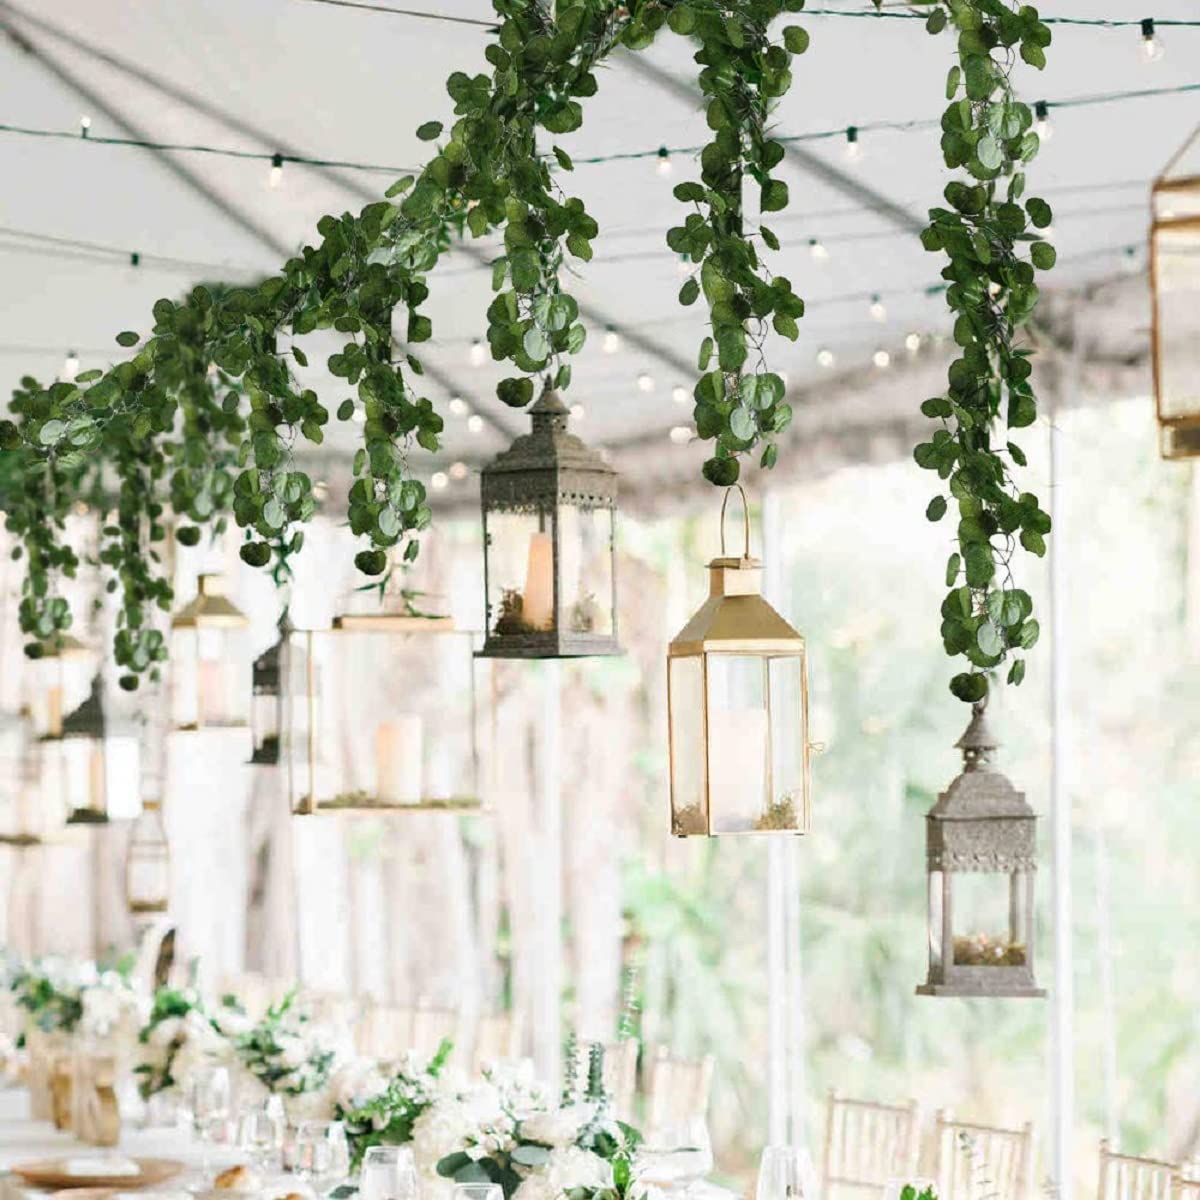 Artificial garland with lanterns hanging above wedding reception setting.